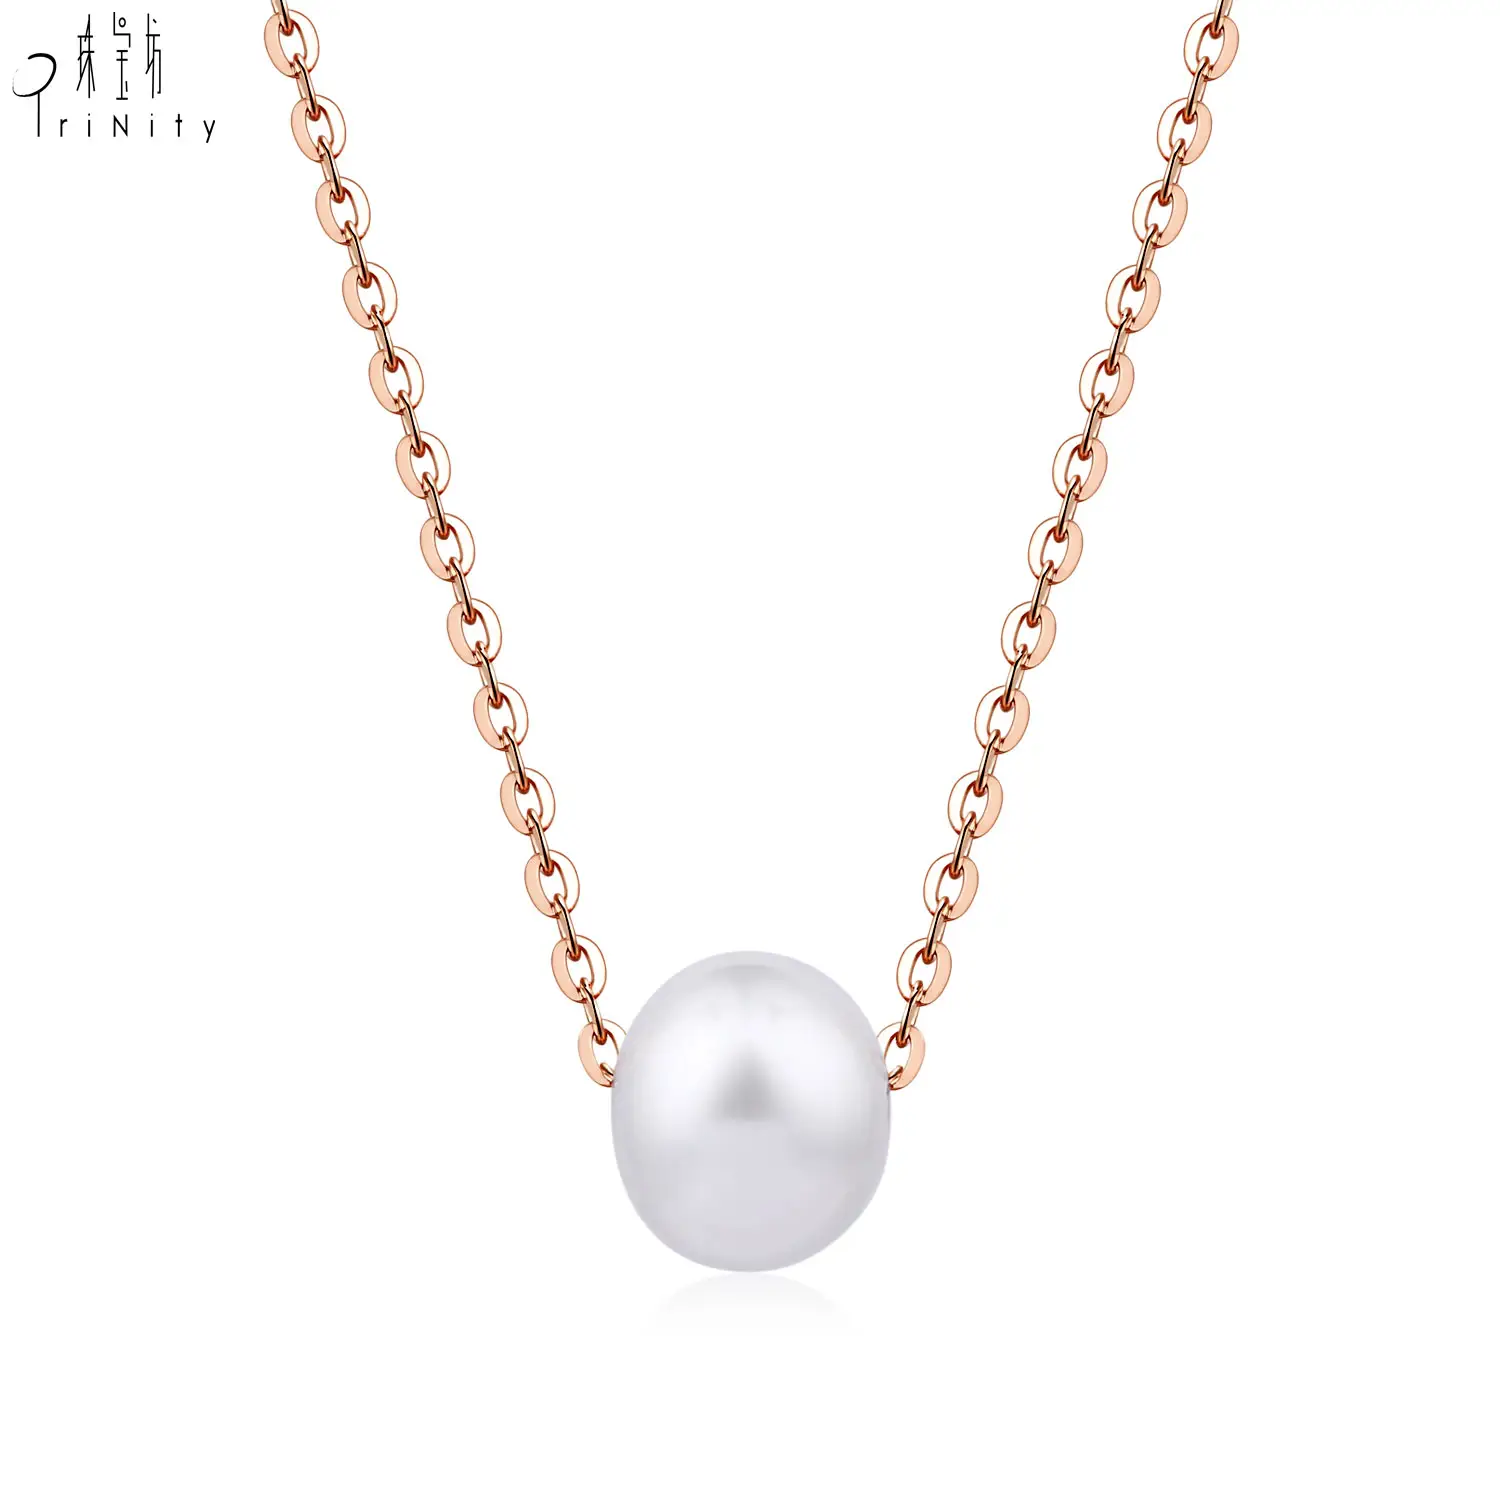 New Design Necklace New Arrival Simple Elegant Pearl Jewelry 18K Solid Rose Gold Natural FreshWater Pearl Pendant Necklace For Girls